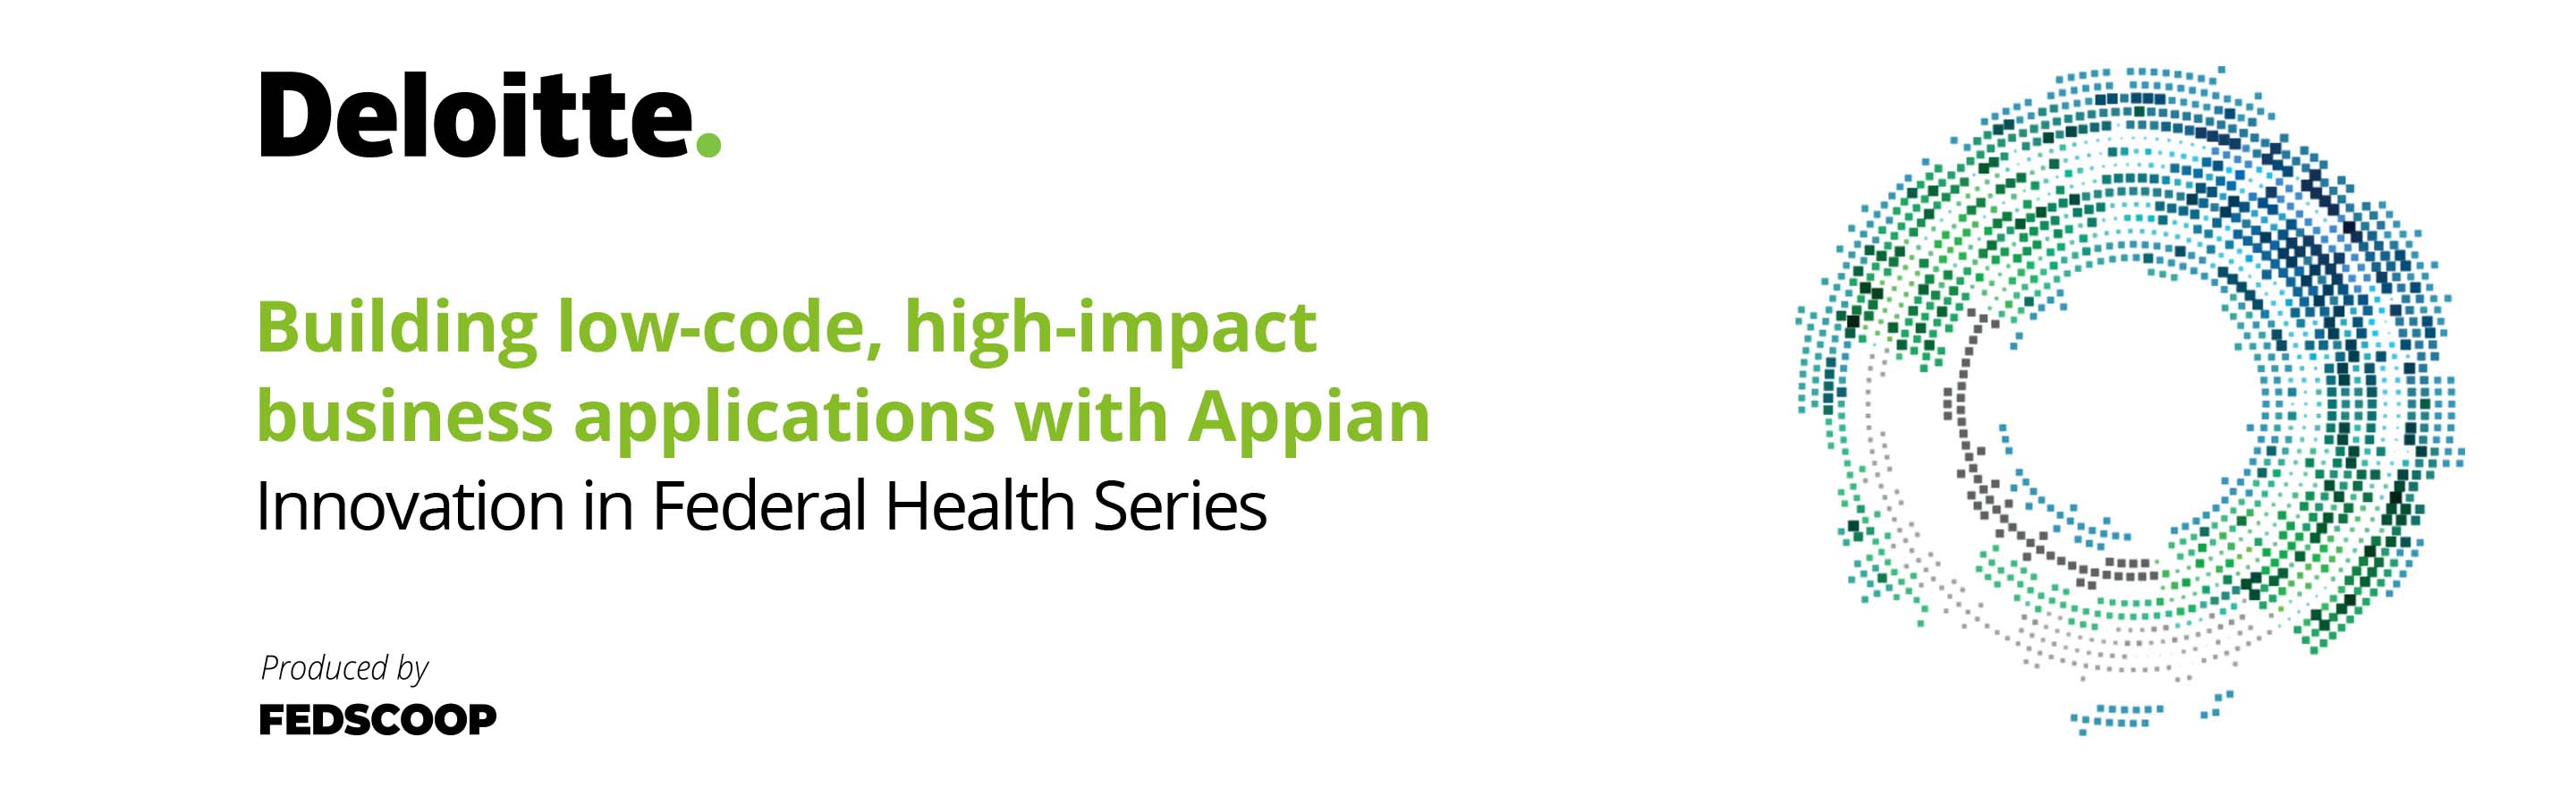 Building low-code, high-impact business applications with Appian